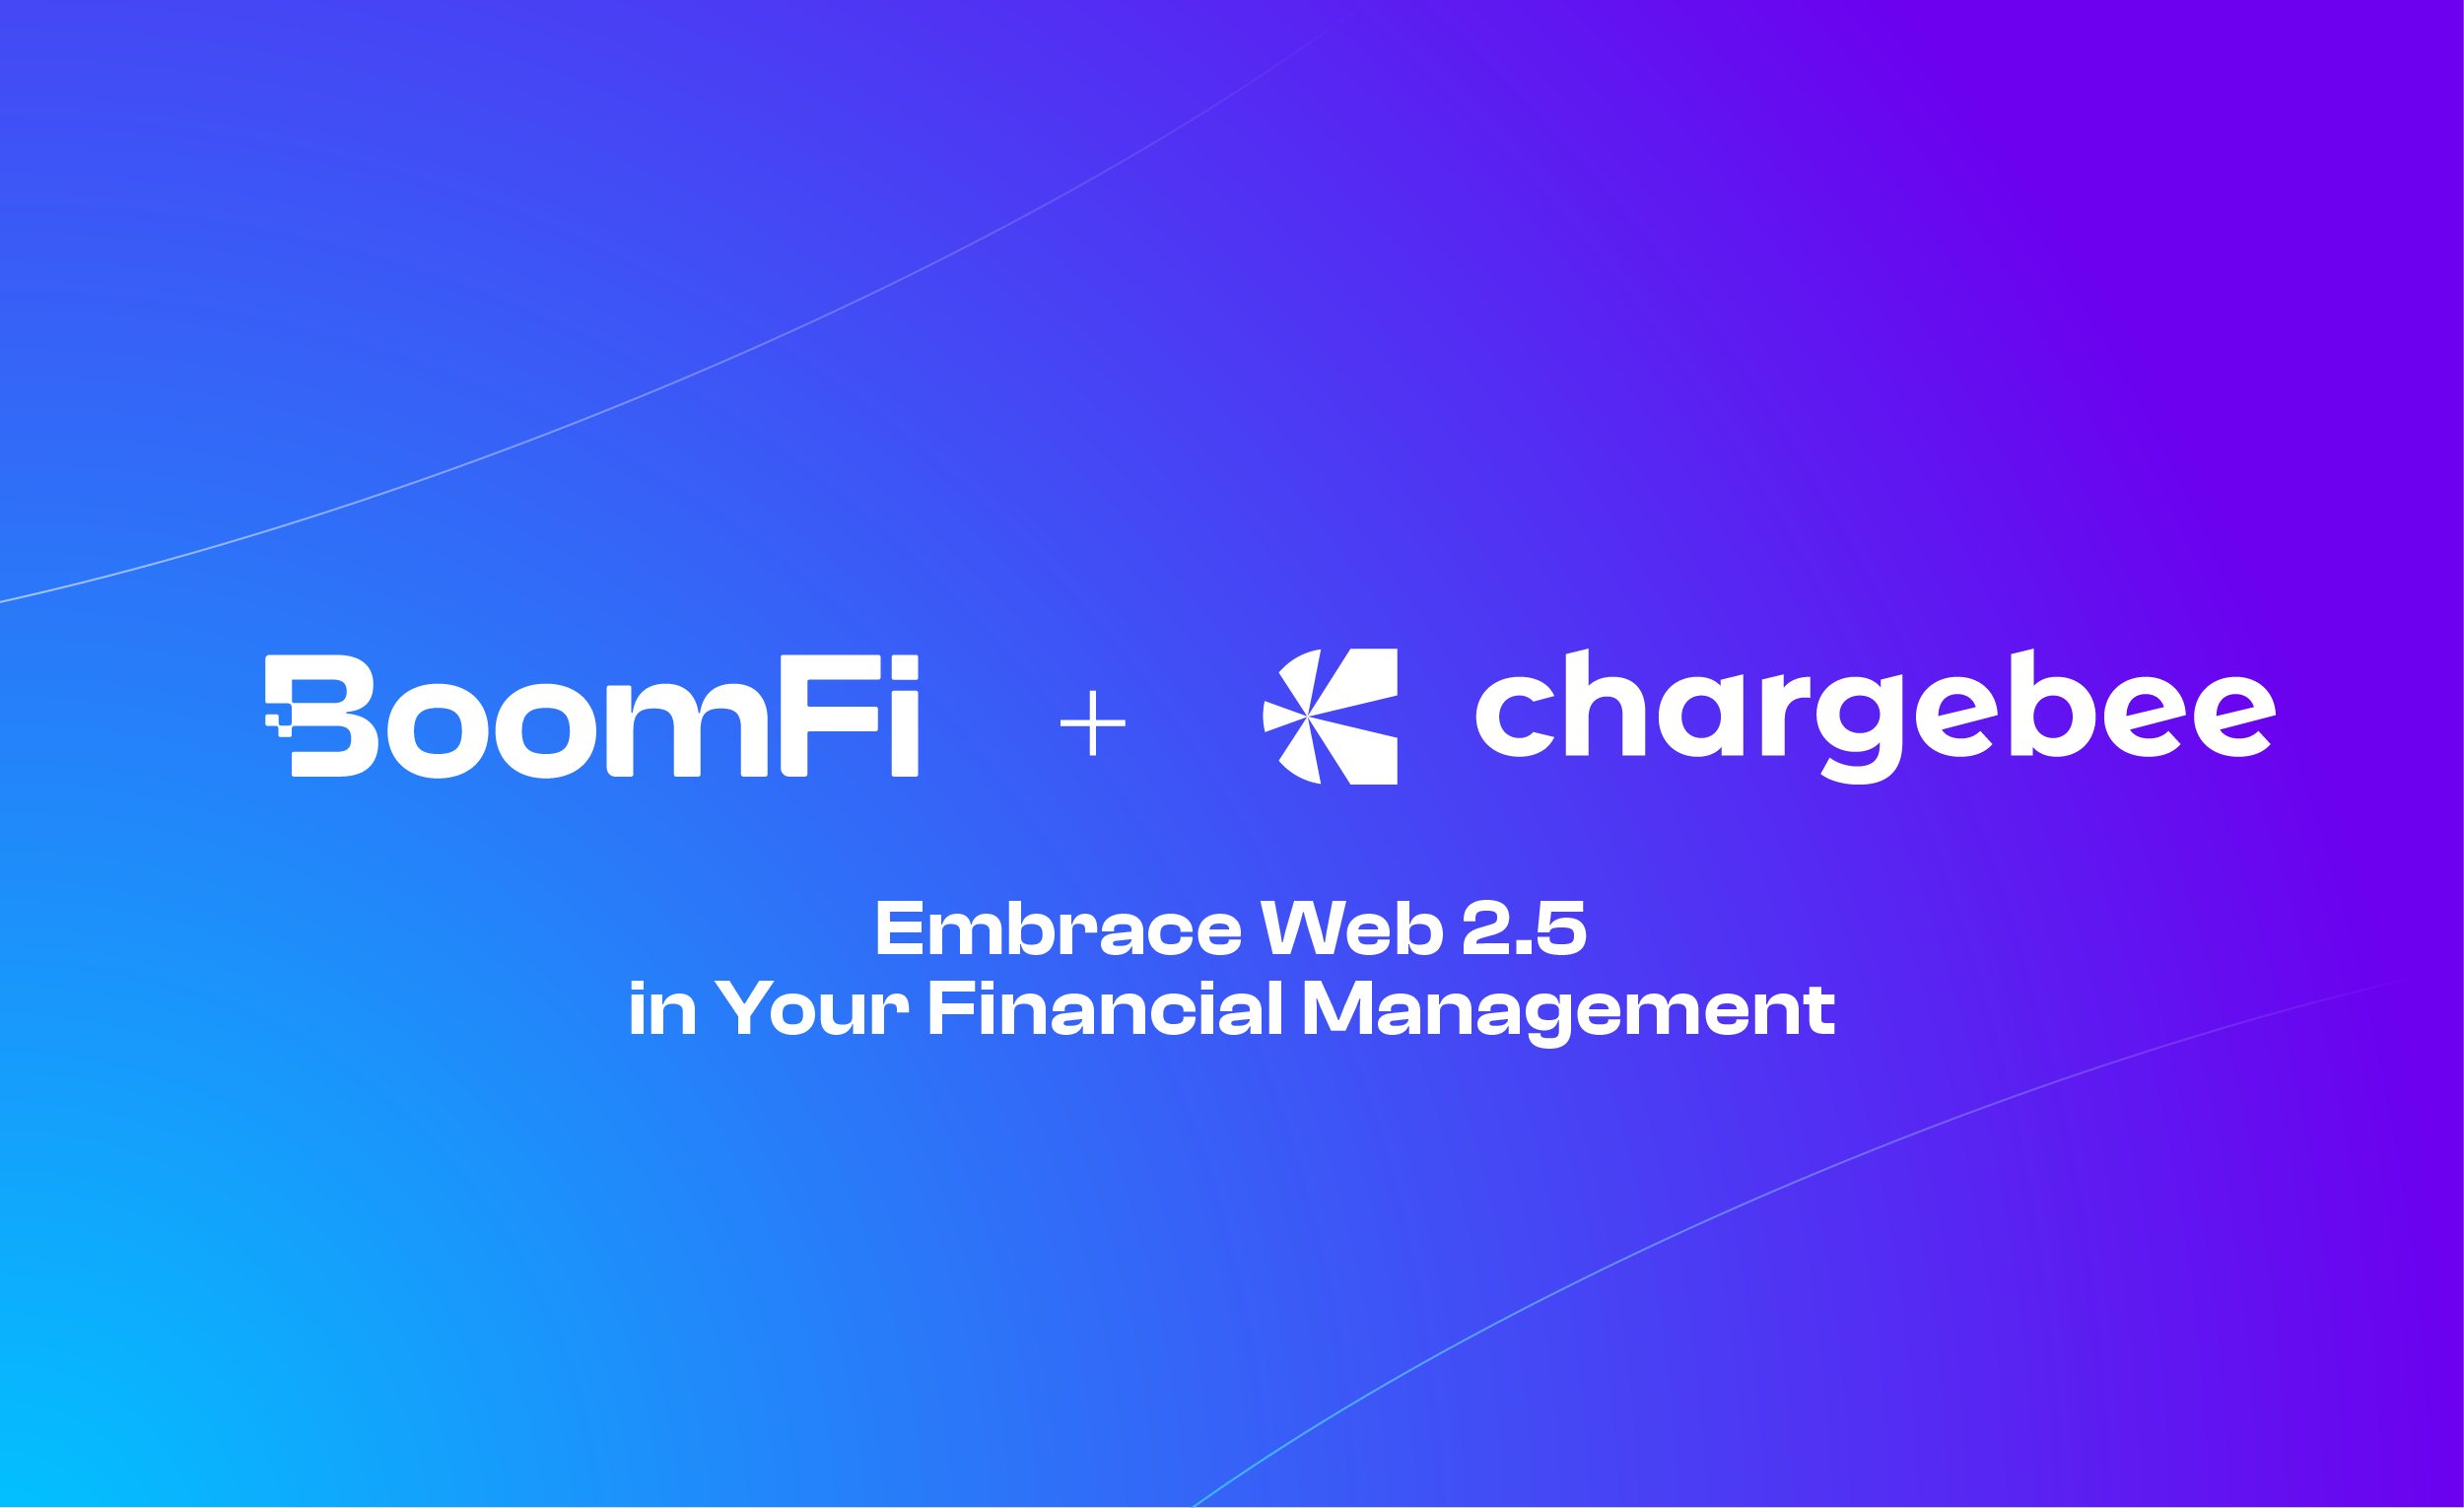 BoomFi + Chargebee Integration is Here: Embrace Web 2.5 in Your Financial Management